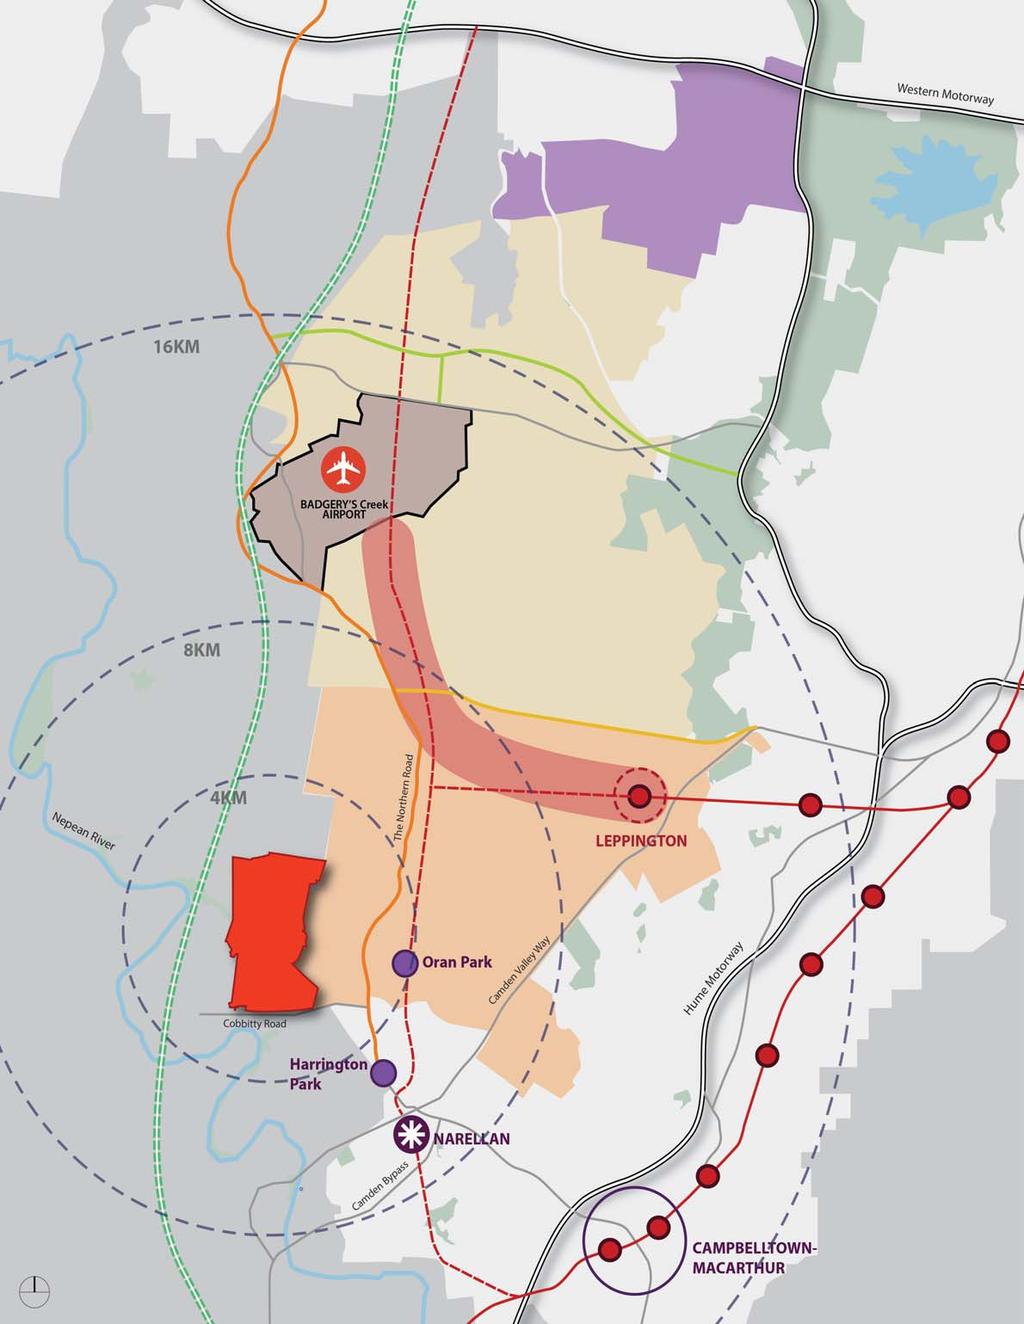 02 Strategic Context Regional Tidapa is situated within the Macarthur Region, approximately 48 kilometres south west of the Sydney Central Business District (CBD).